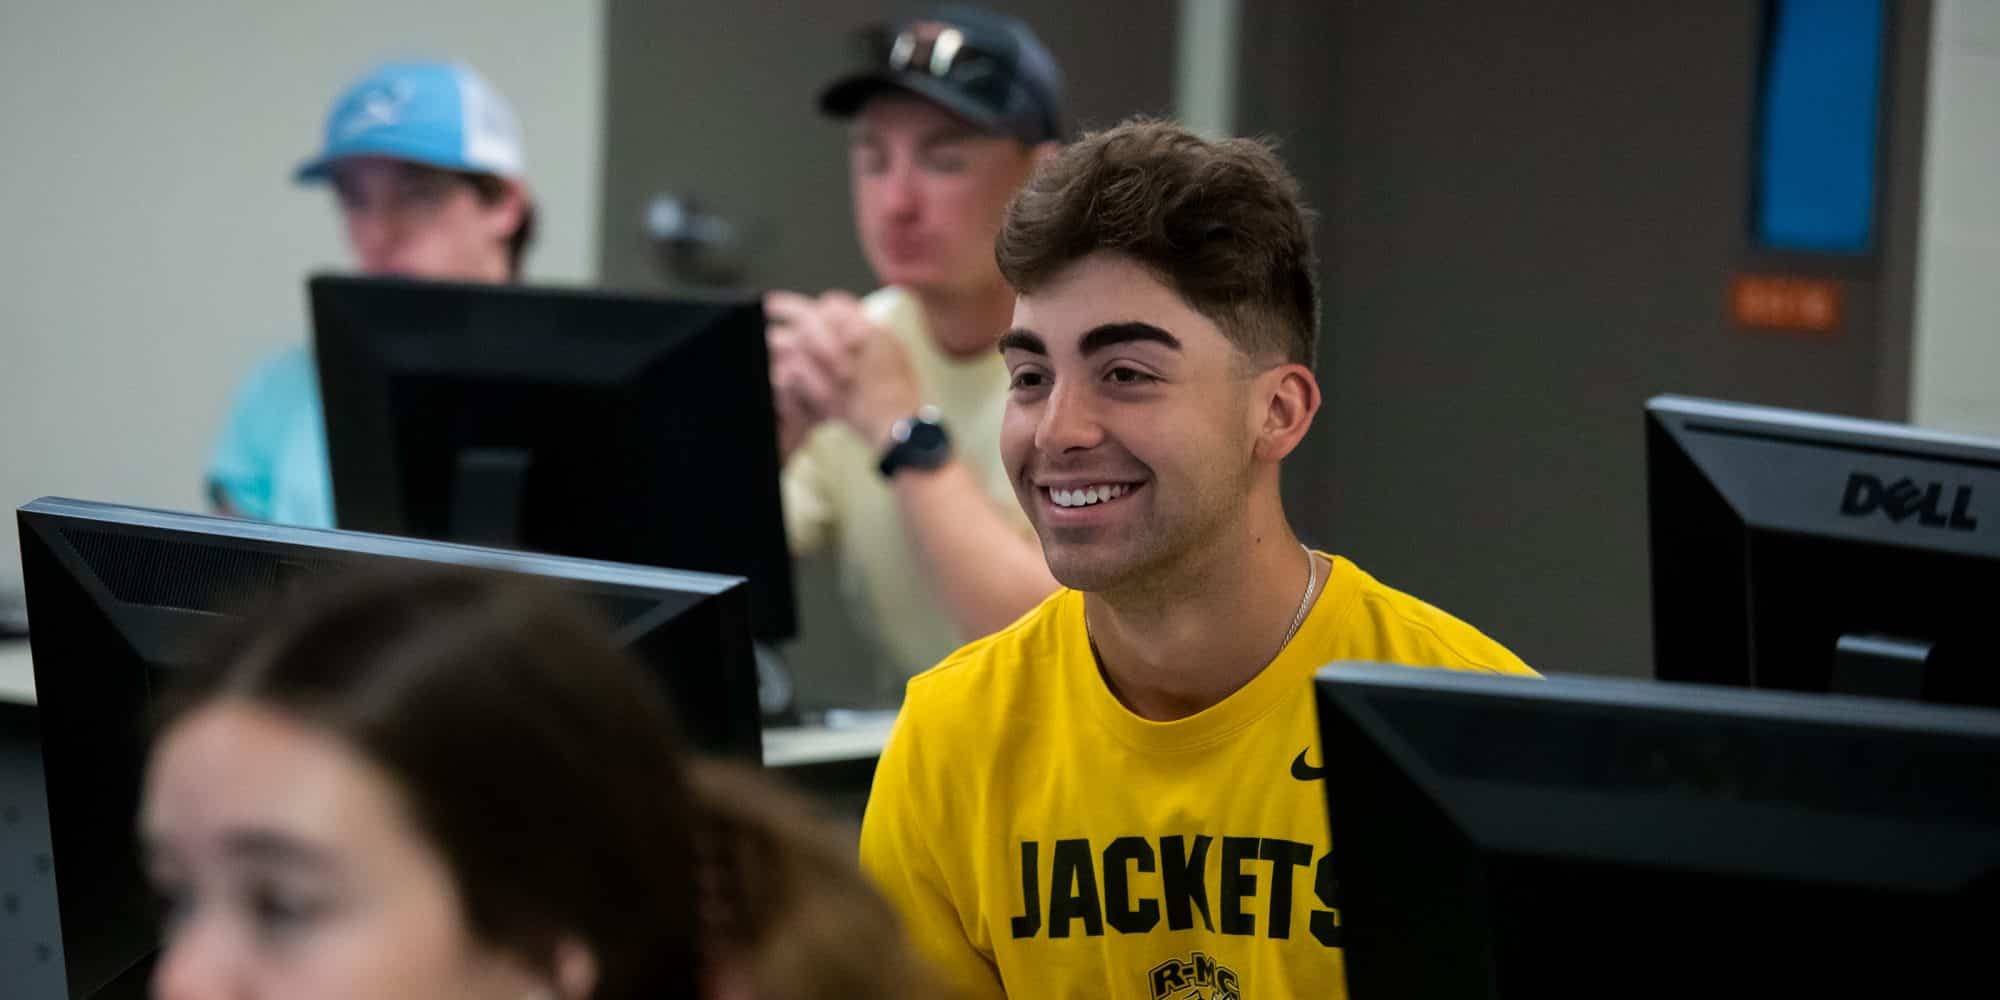 A young man in a yellow "cybersecurity" t-shirt smiling in a classroom with computers, surrounded by other students.